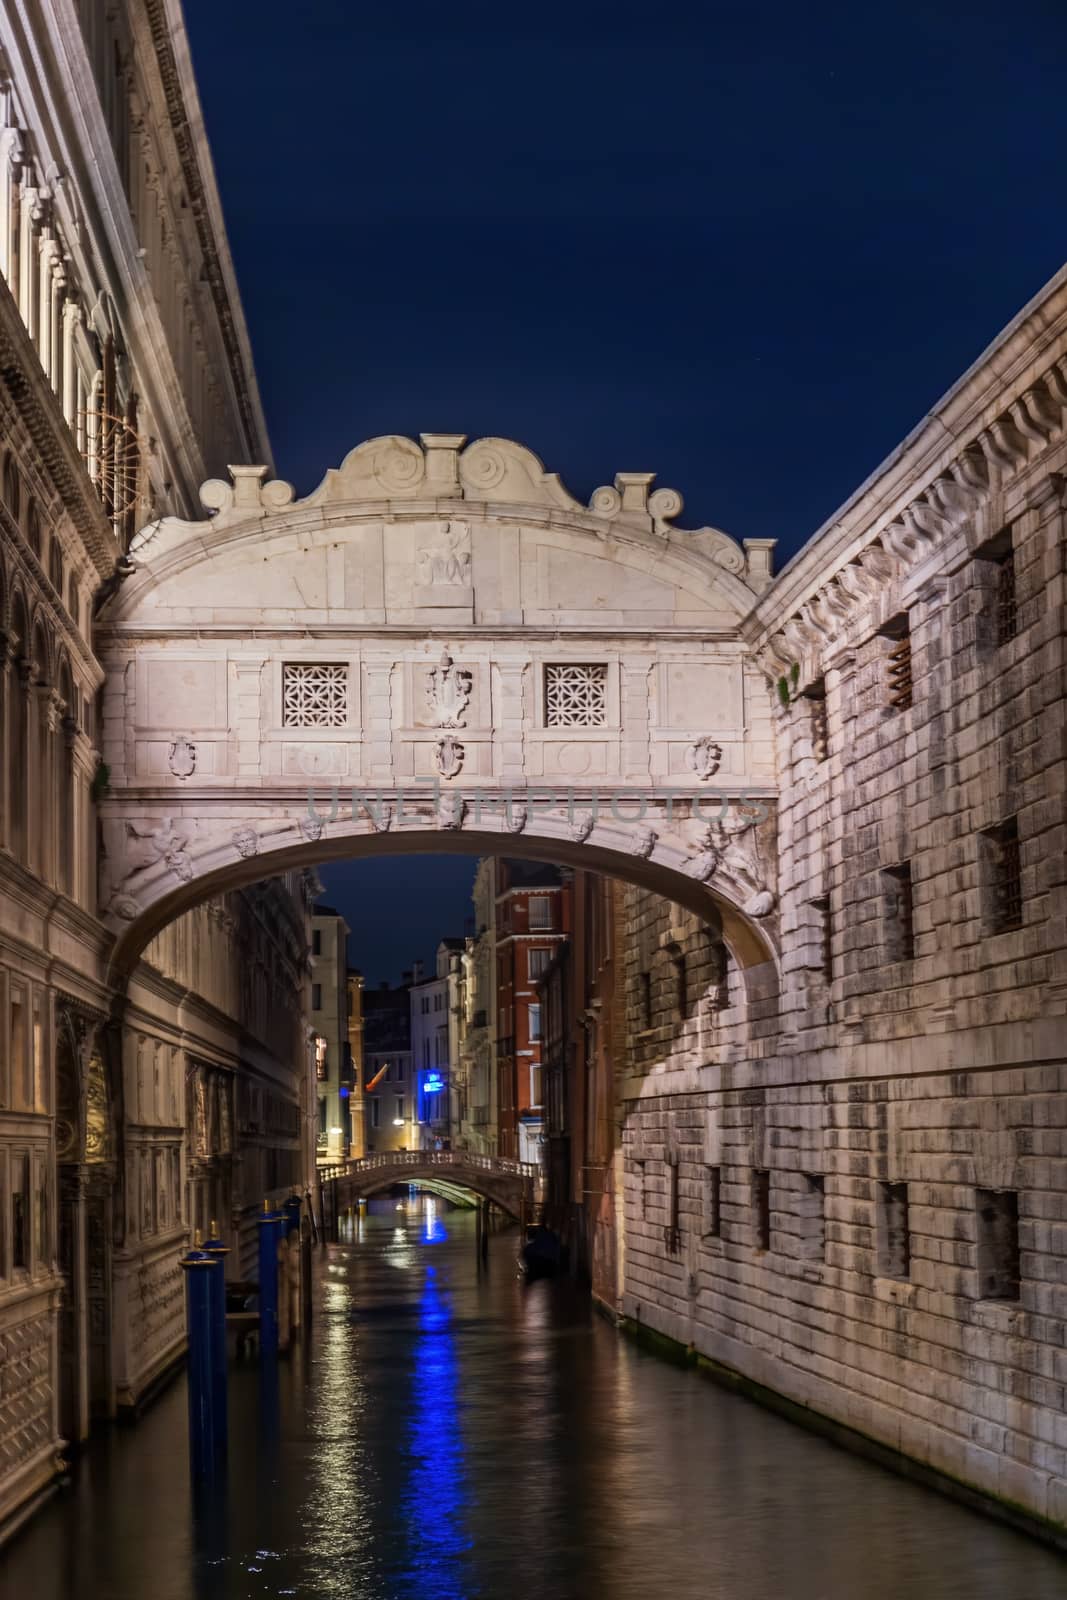 The Bridge of Sighs or Ponte dei Sospiri at night in Venice, Italy by COffe